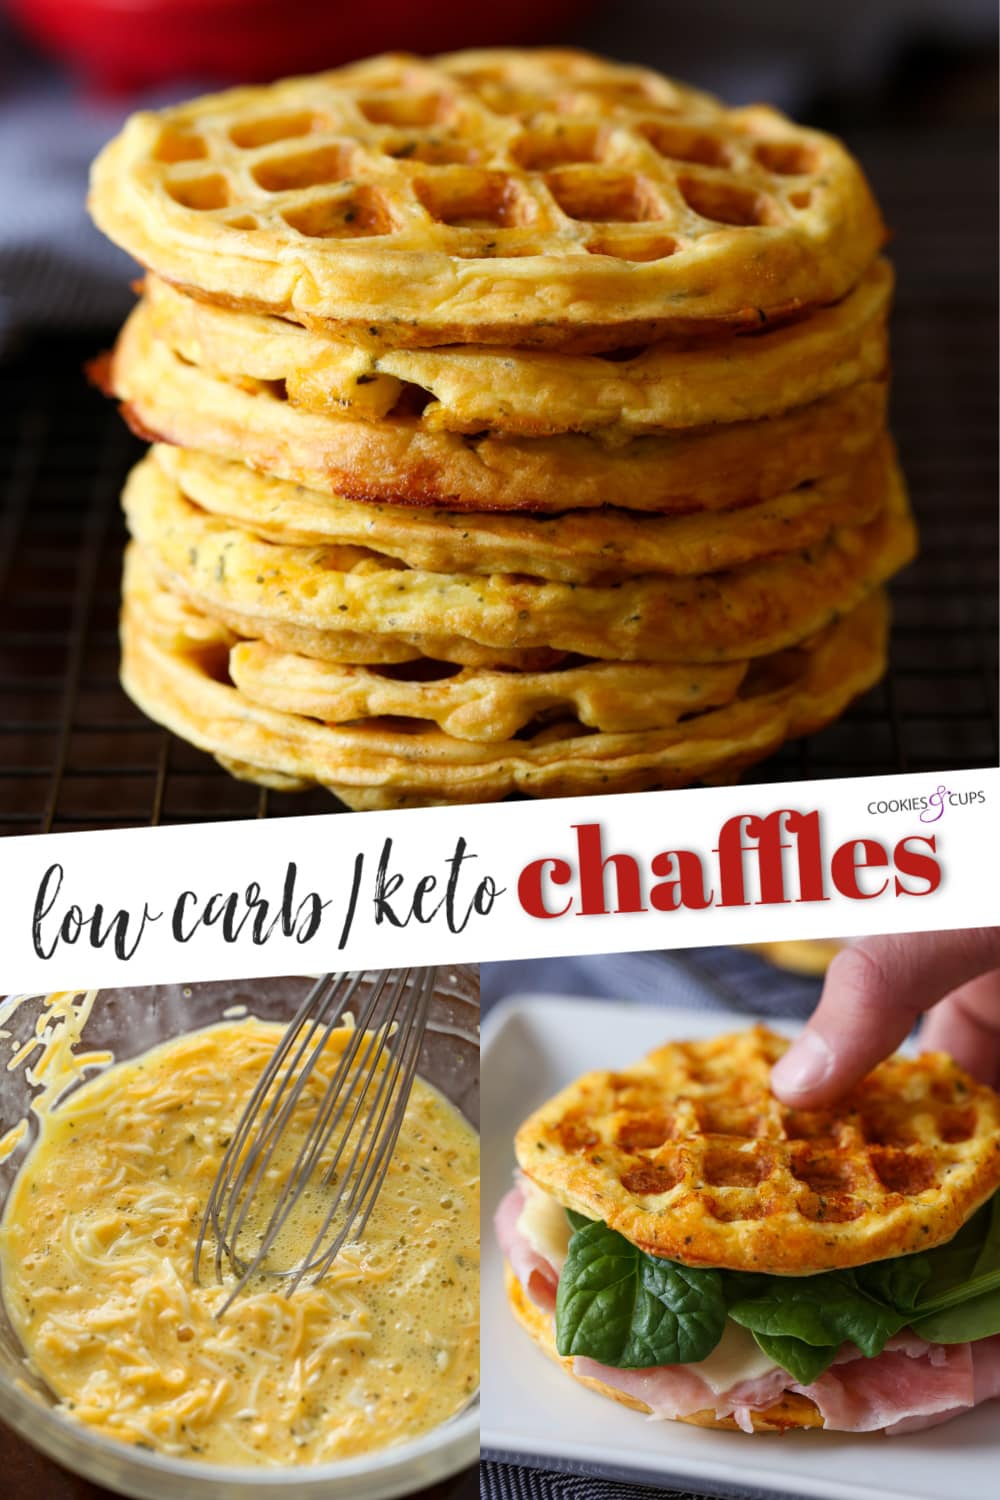 Chaffles - Low Carb/Keto Chaffle Recipe | Cookies and Cups